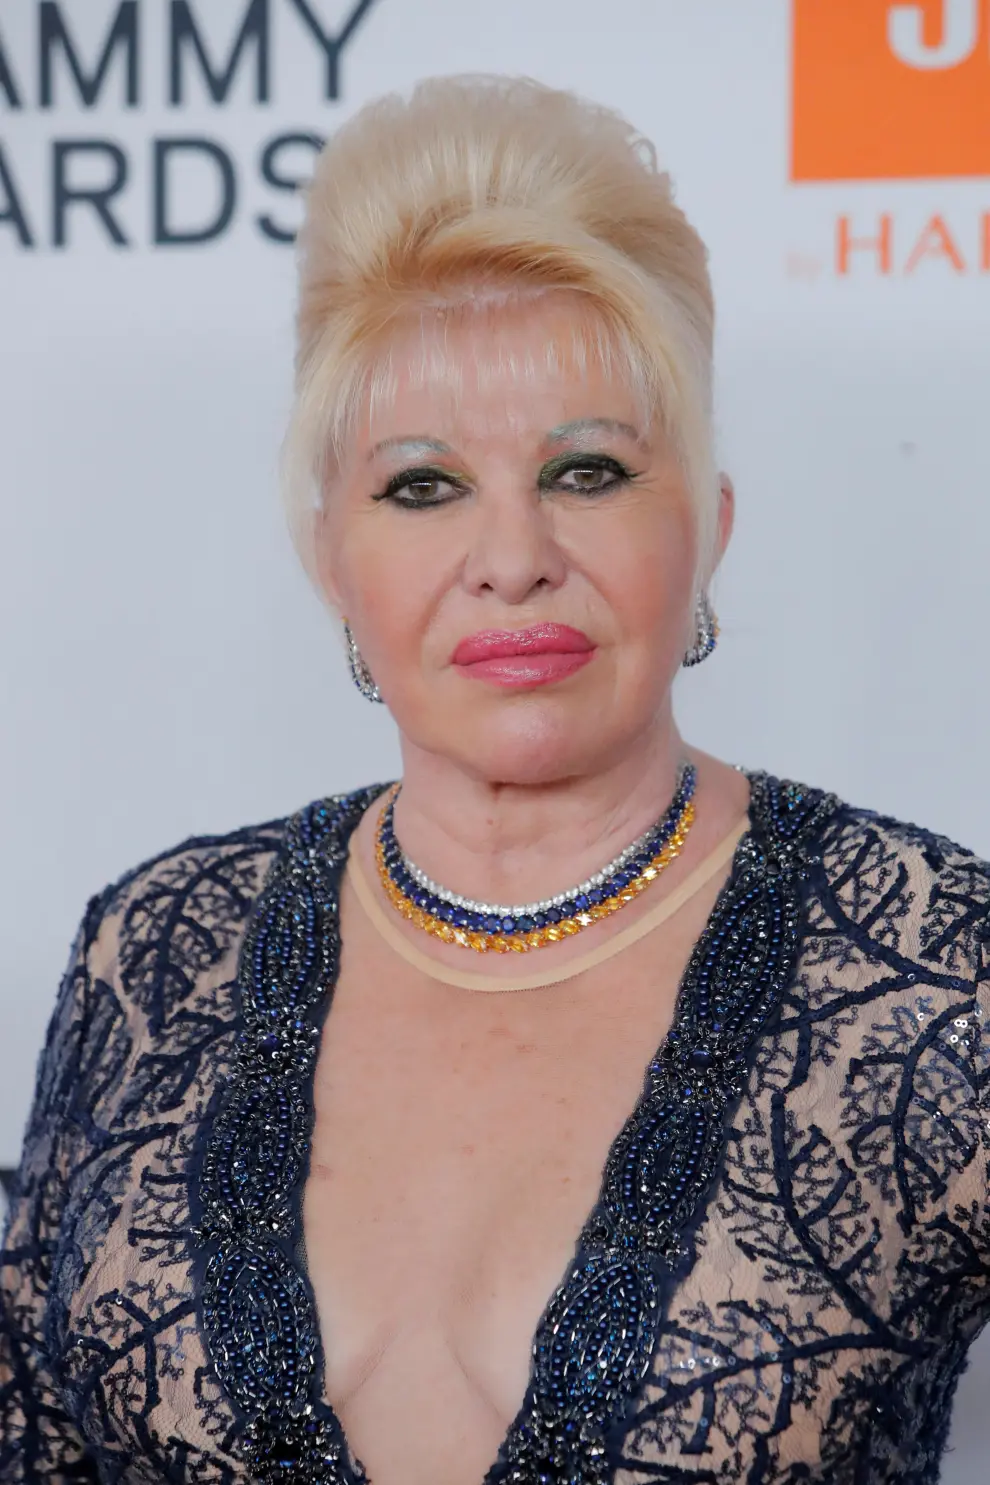 FILE PHOTO: Ivana Trump attends the 2018 Pre-GRAMMY Gala & GRAMMY Salute to Industry Icons presented by Clive Davis and The Recording Academy honoring Shawn "JAY-Z" Carter in Manhattan, New York